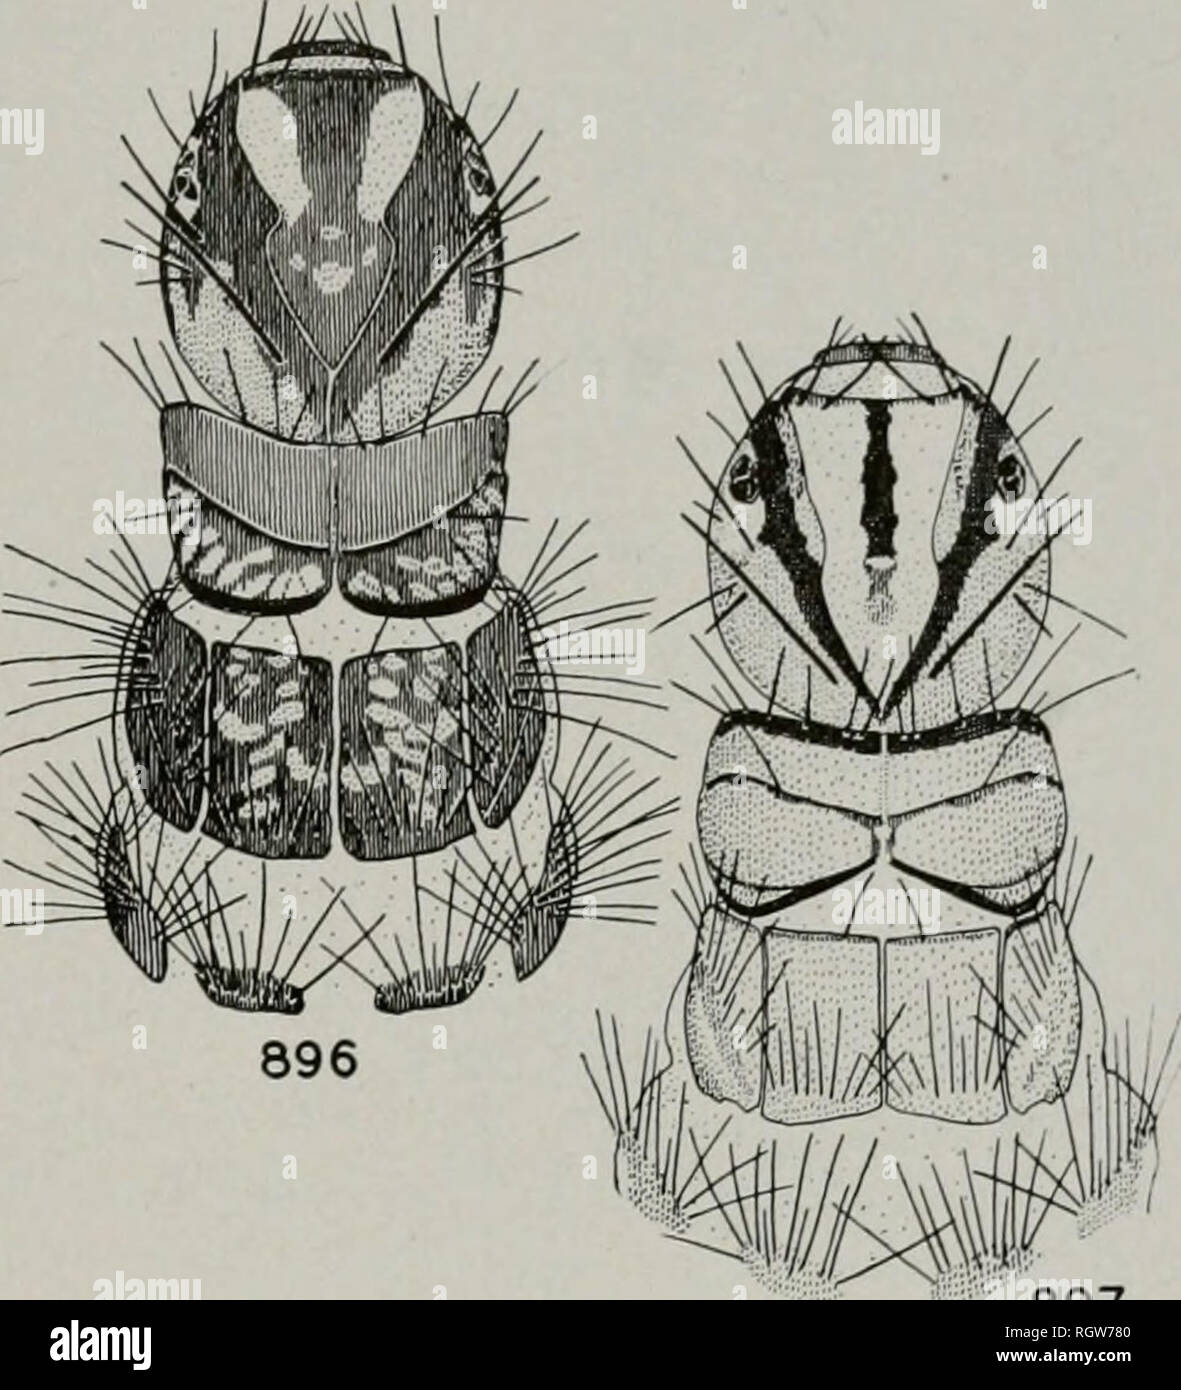 . Bulletin. Natural history; Natural history. August, 1944 Ross: Caddis Flies of Illinois 263 Burks, S S, $9,7 pupae, many larvae; Kankakee River, May 24, 1937, H. H. Ross, $ S , 9 9; May 5, 1938, Ross &amp; Burks, S $, 9 9, many pupae; Aug. 19, 1939, Ross &amp; Burks, 1 larva; May 1, 1941, T. H. Frison, 5 $ , 19. Brachycentrus Curtis Brachycentrus Curtis (1834, p. 216). Geno- type, monobasic: Brachycentrus subnubilus Curtis. Sphinctogaster Provancher (1877, p. 262). Genotype, monobasic: Sphinctogaster lutescens Provancher. Oligoplectnim McLachlan (1868, p. 297). Genotype, by subsequent limita Stock Photo